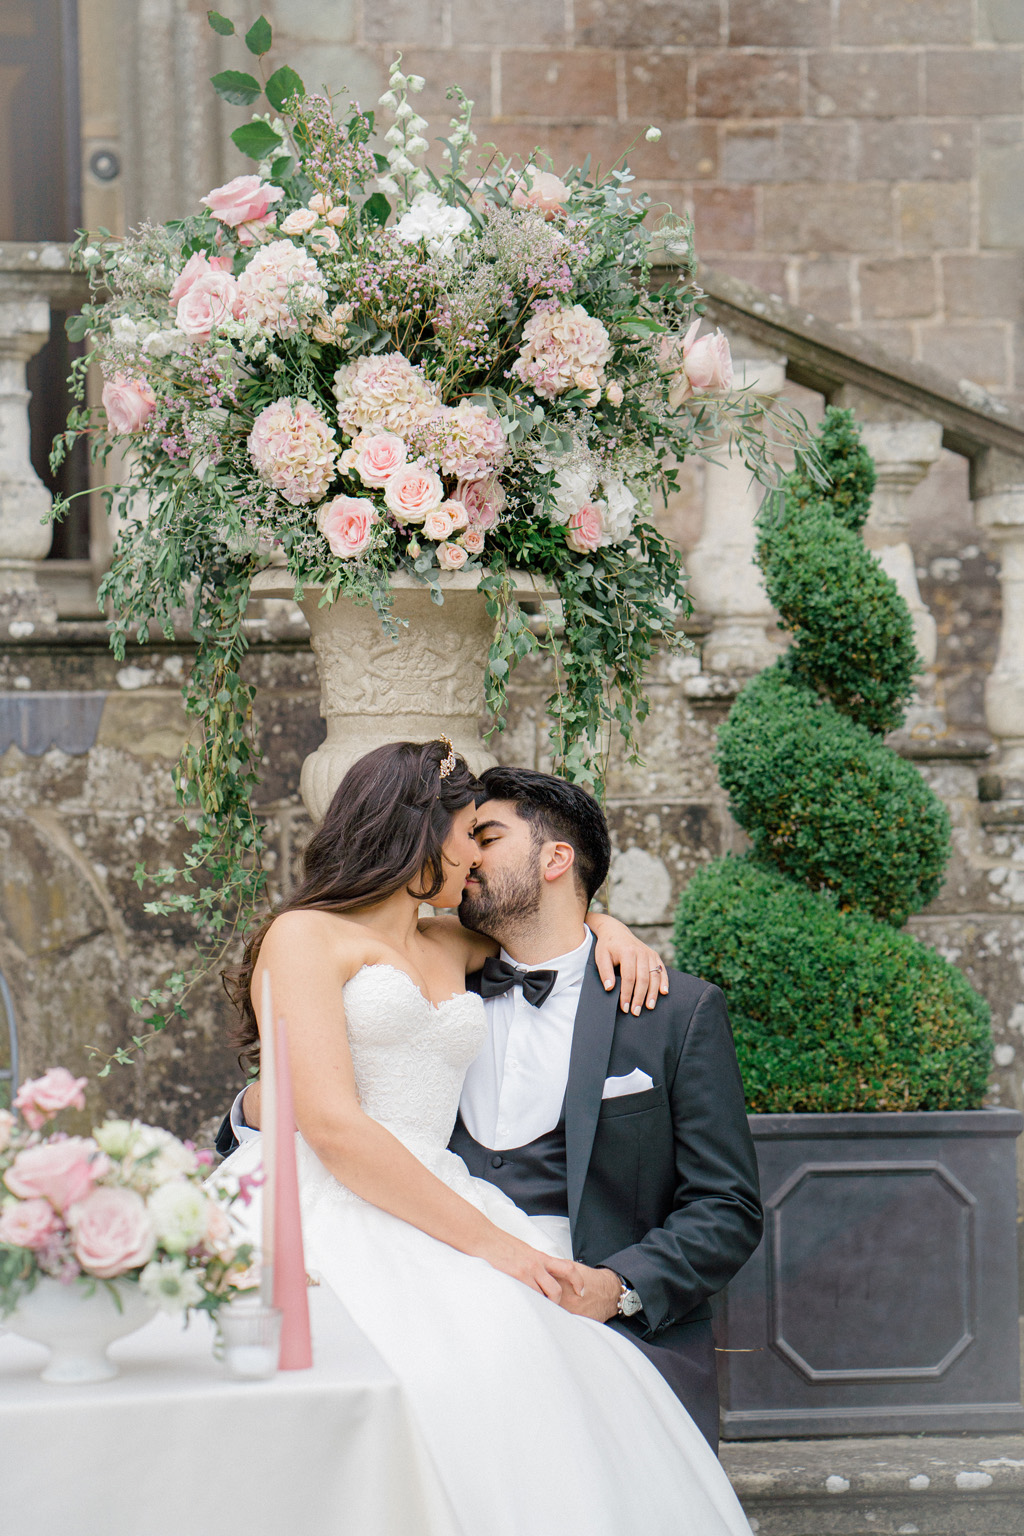 Clearwell Castle bride and groom photoshoot with white and pink floral inspiration